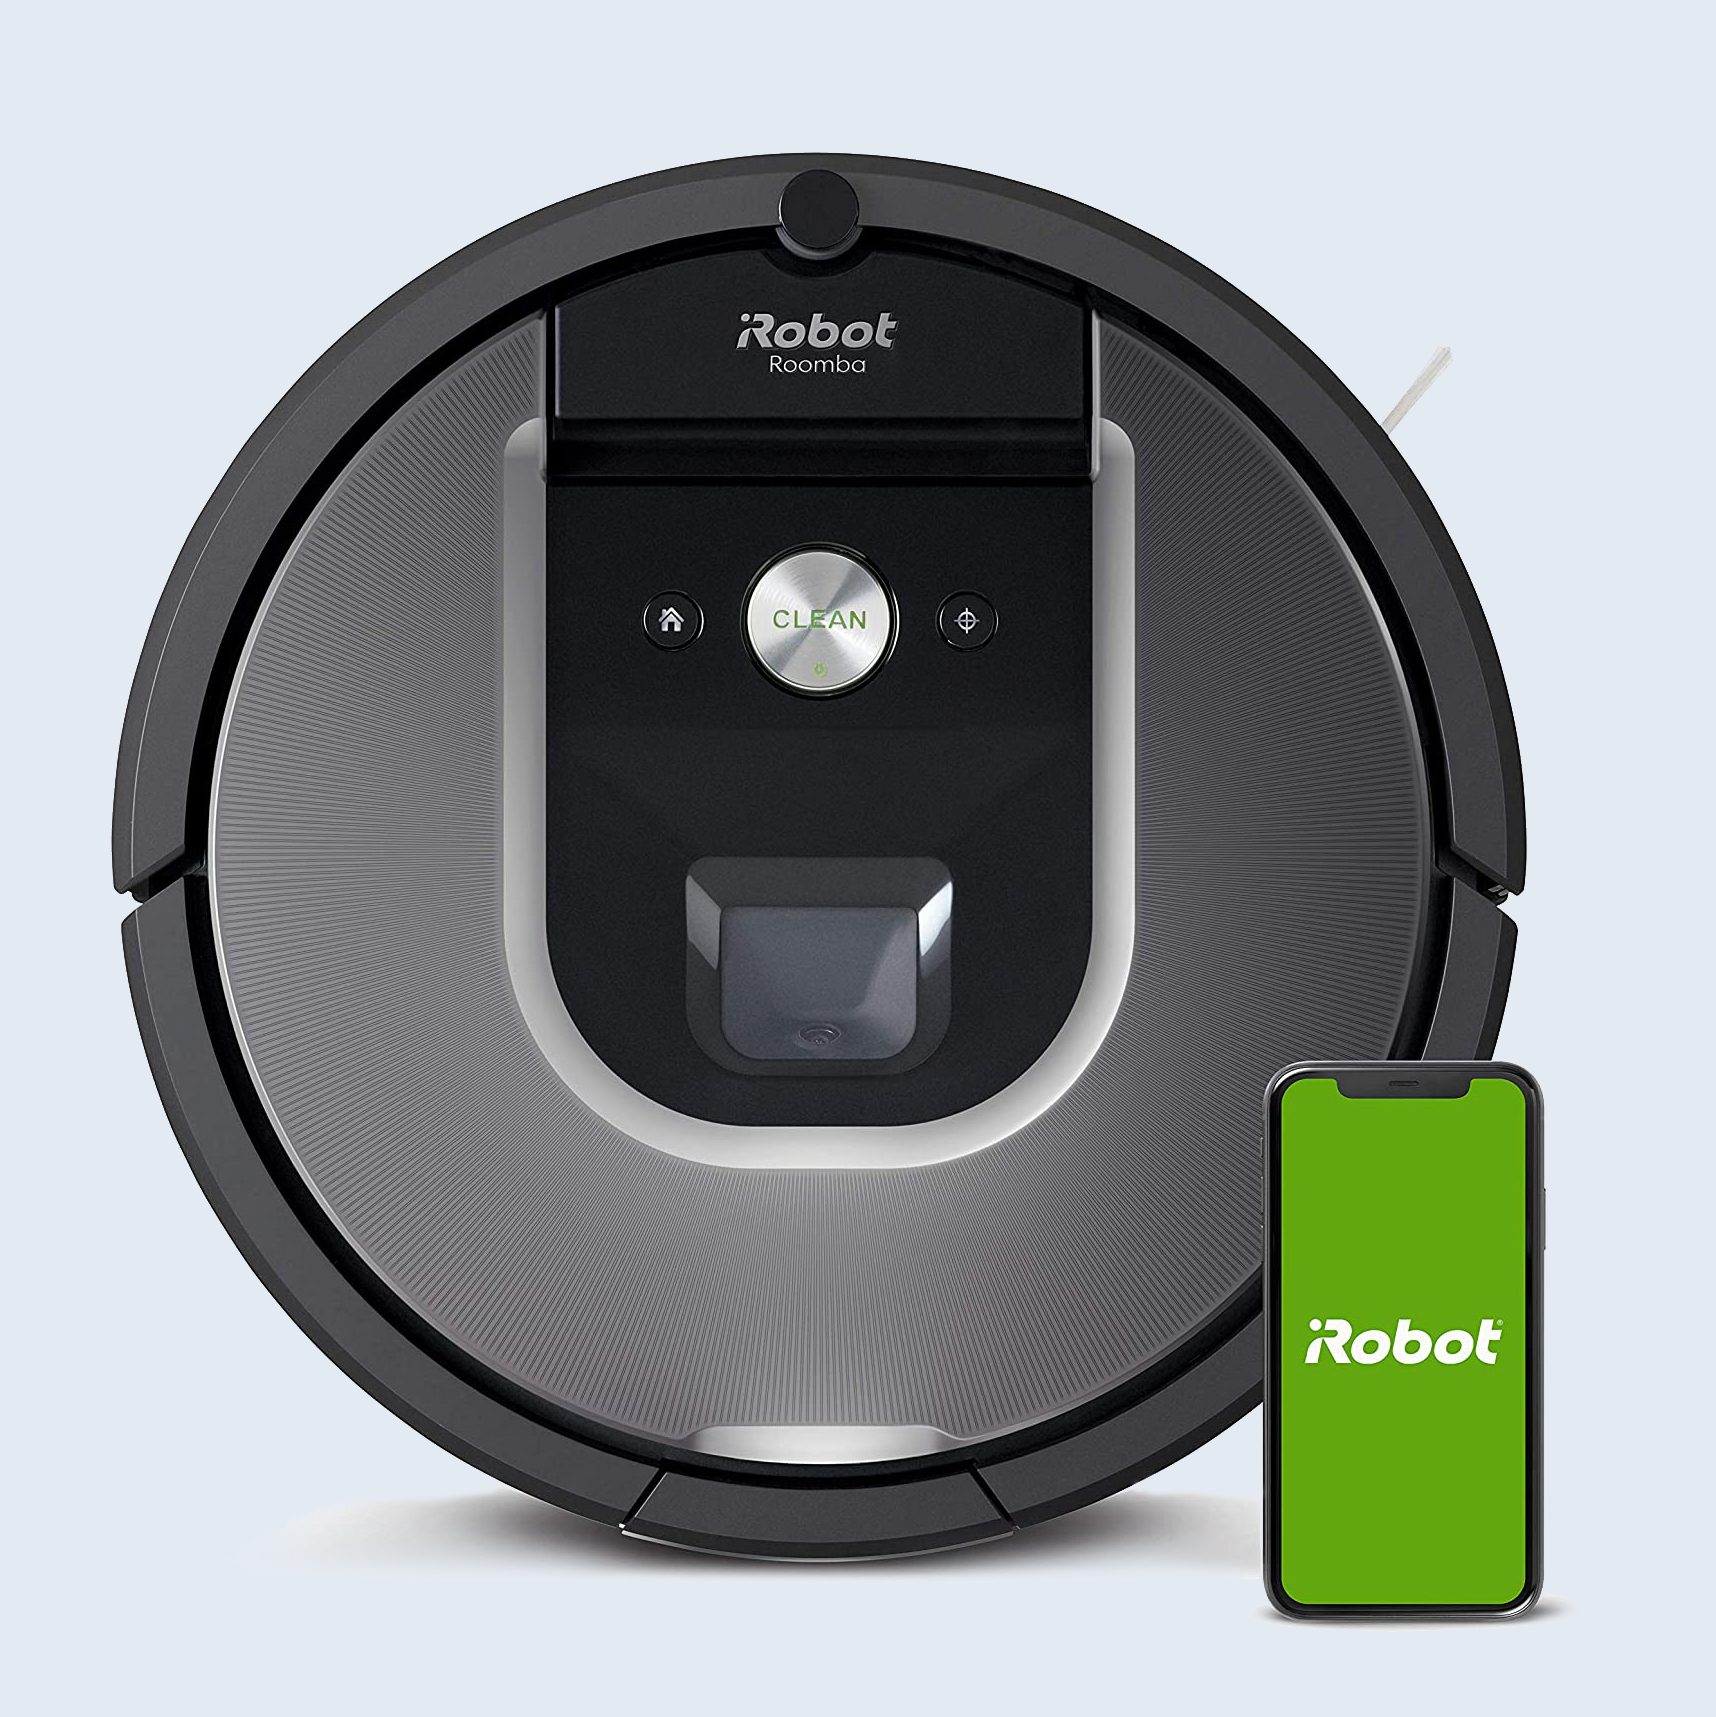 13 Best Robot Vacuums 2021 Reviews of Roomba, Eufy, Shark & More